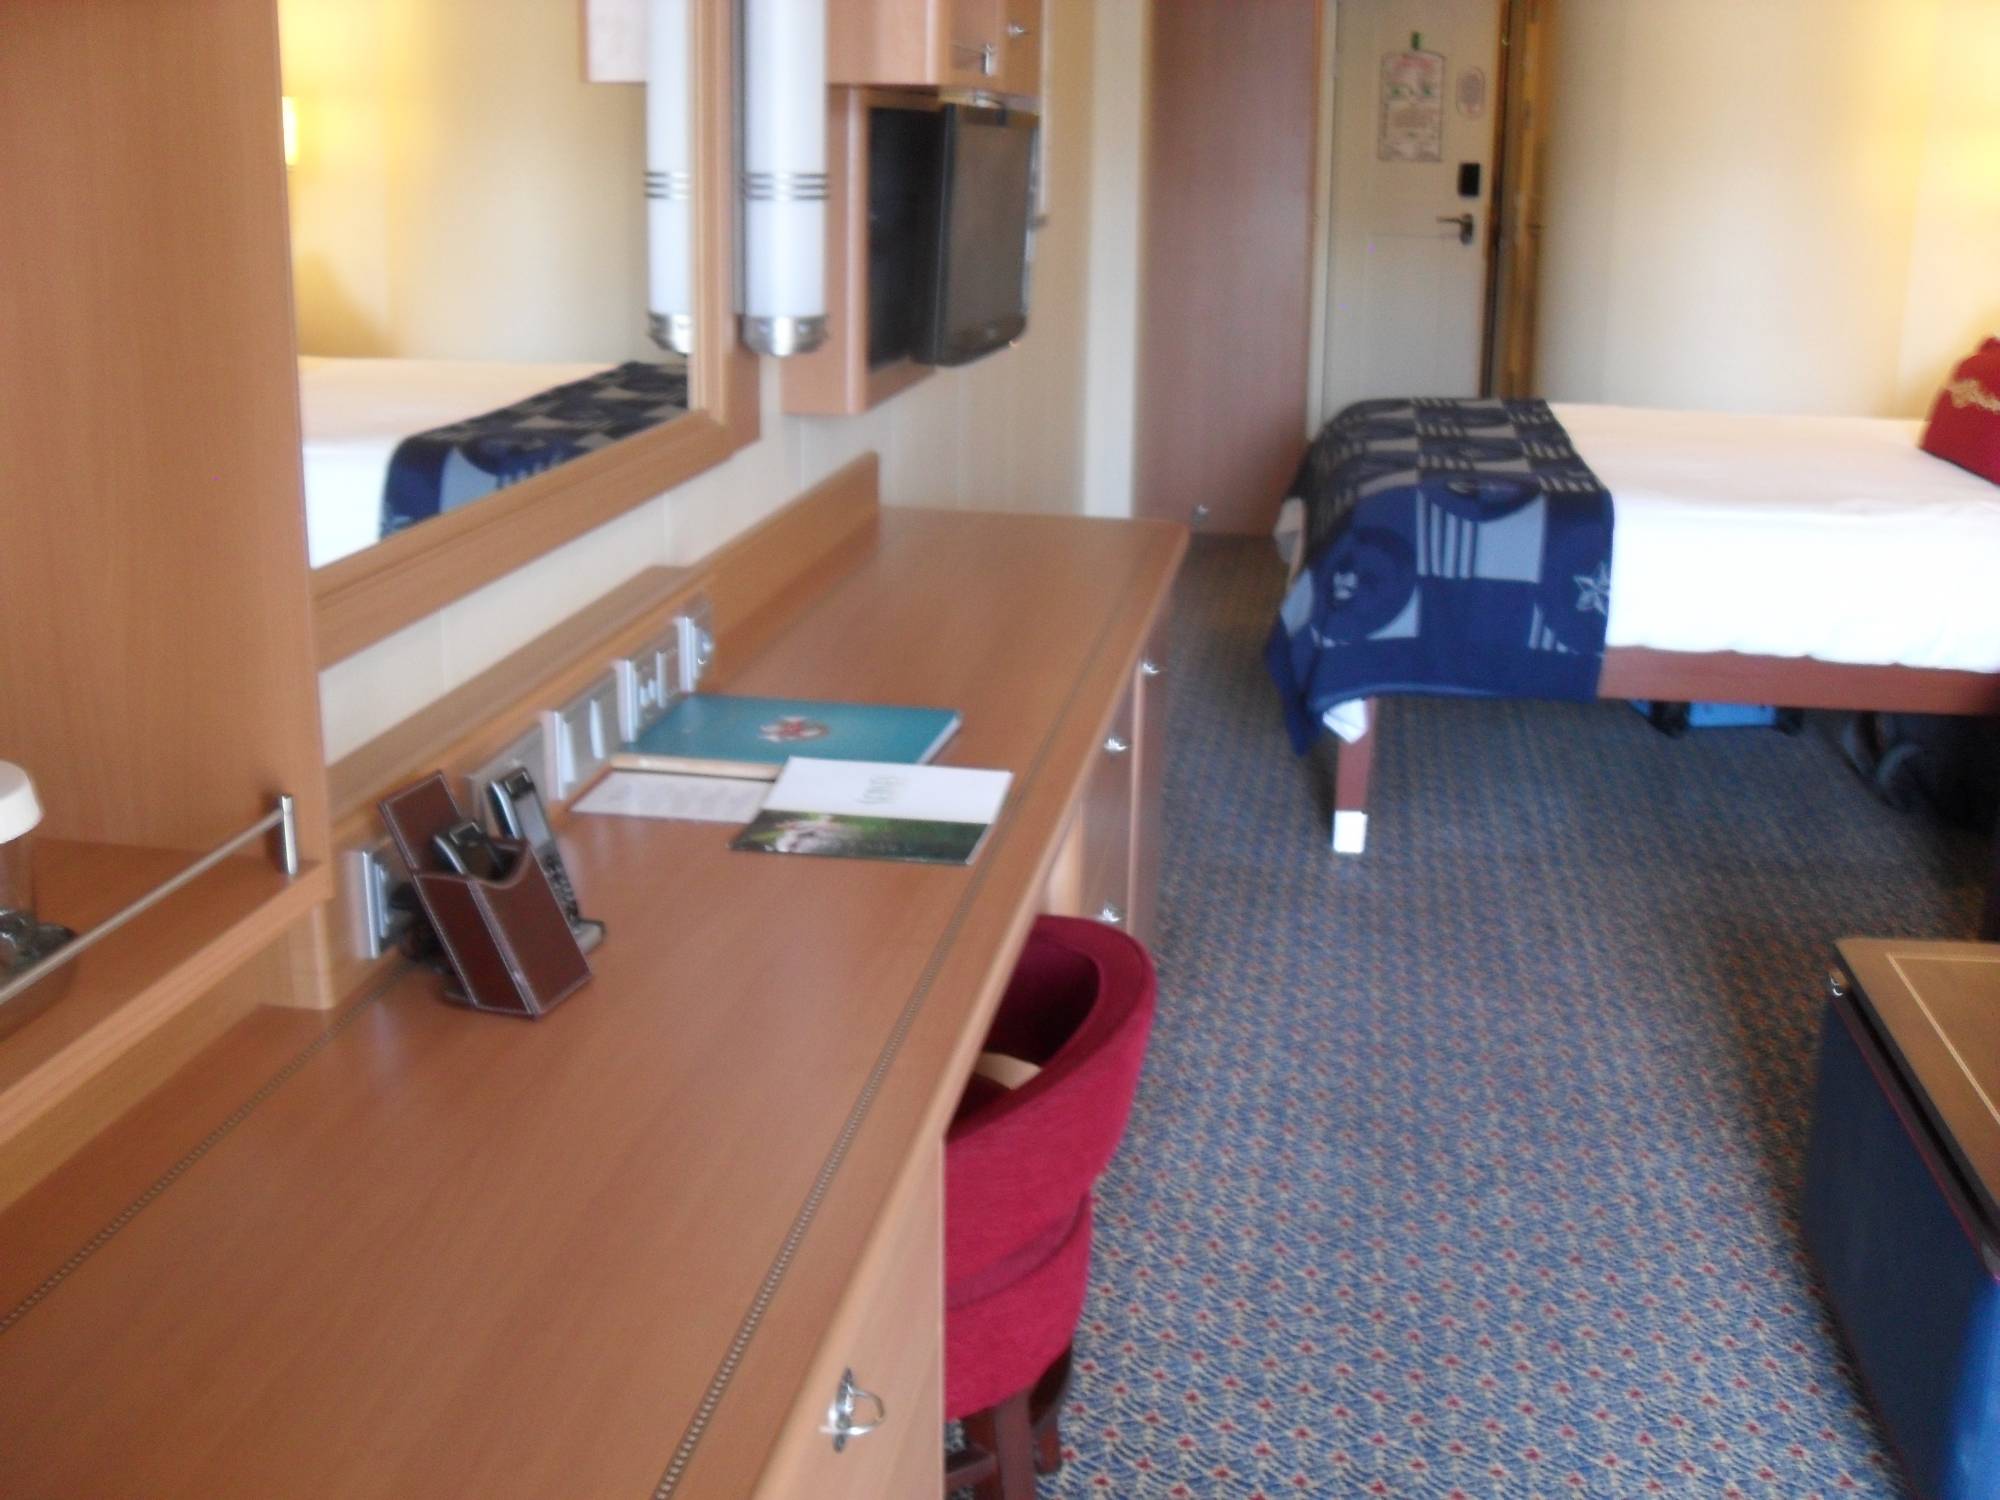 Category 4A Stateroom, 9086